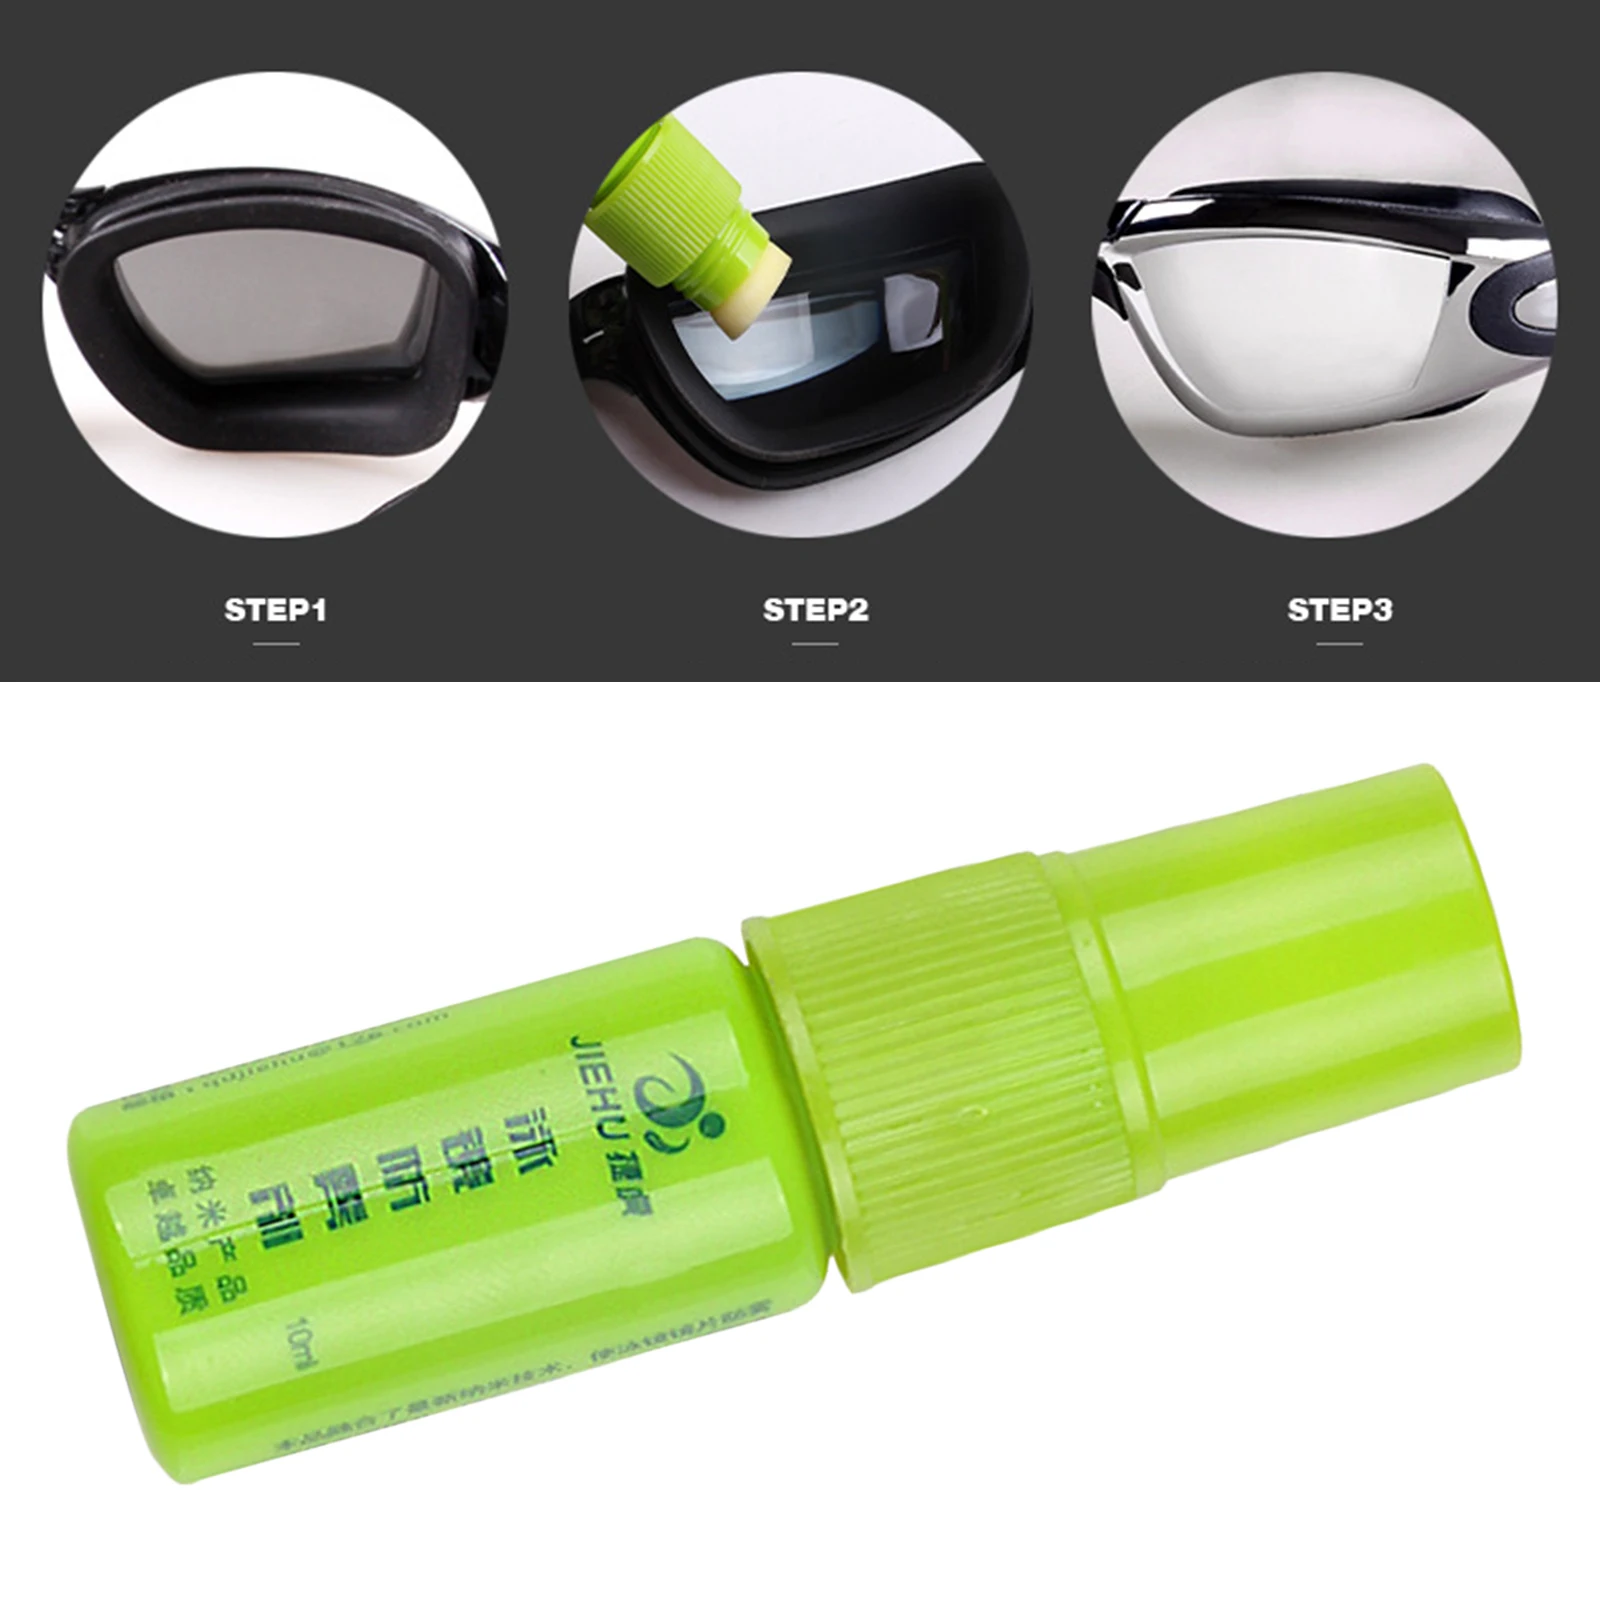 

10ml Durable Solid State Nano Anti Fog Agent Defogger for Diving Mask Goggles Car Glass Swim Diving Goggles Glasses Accessories